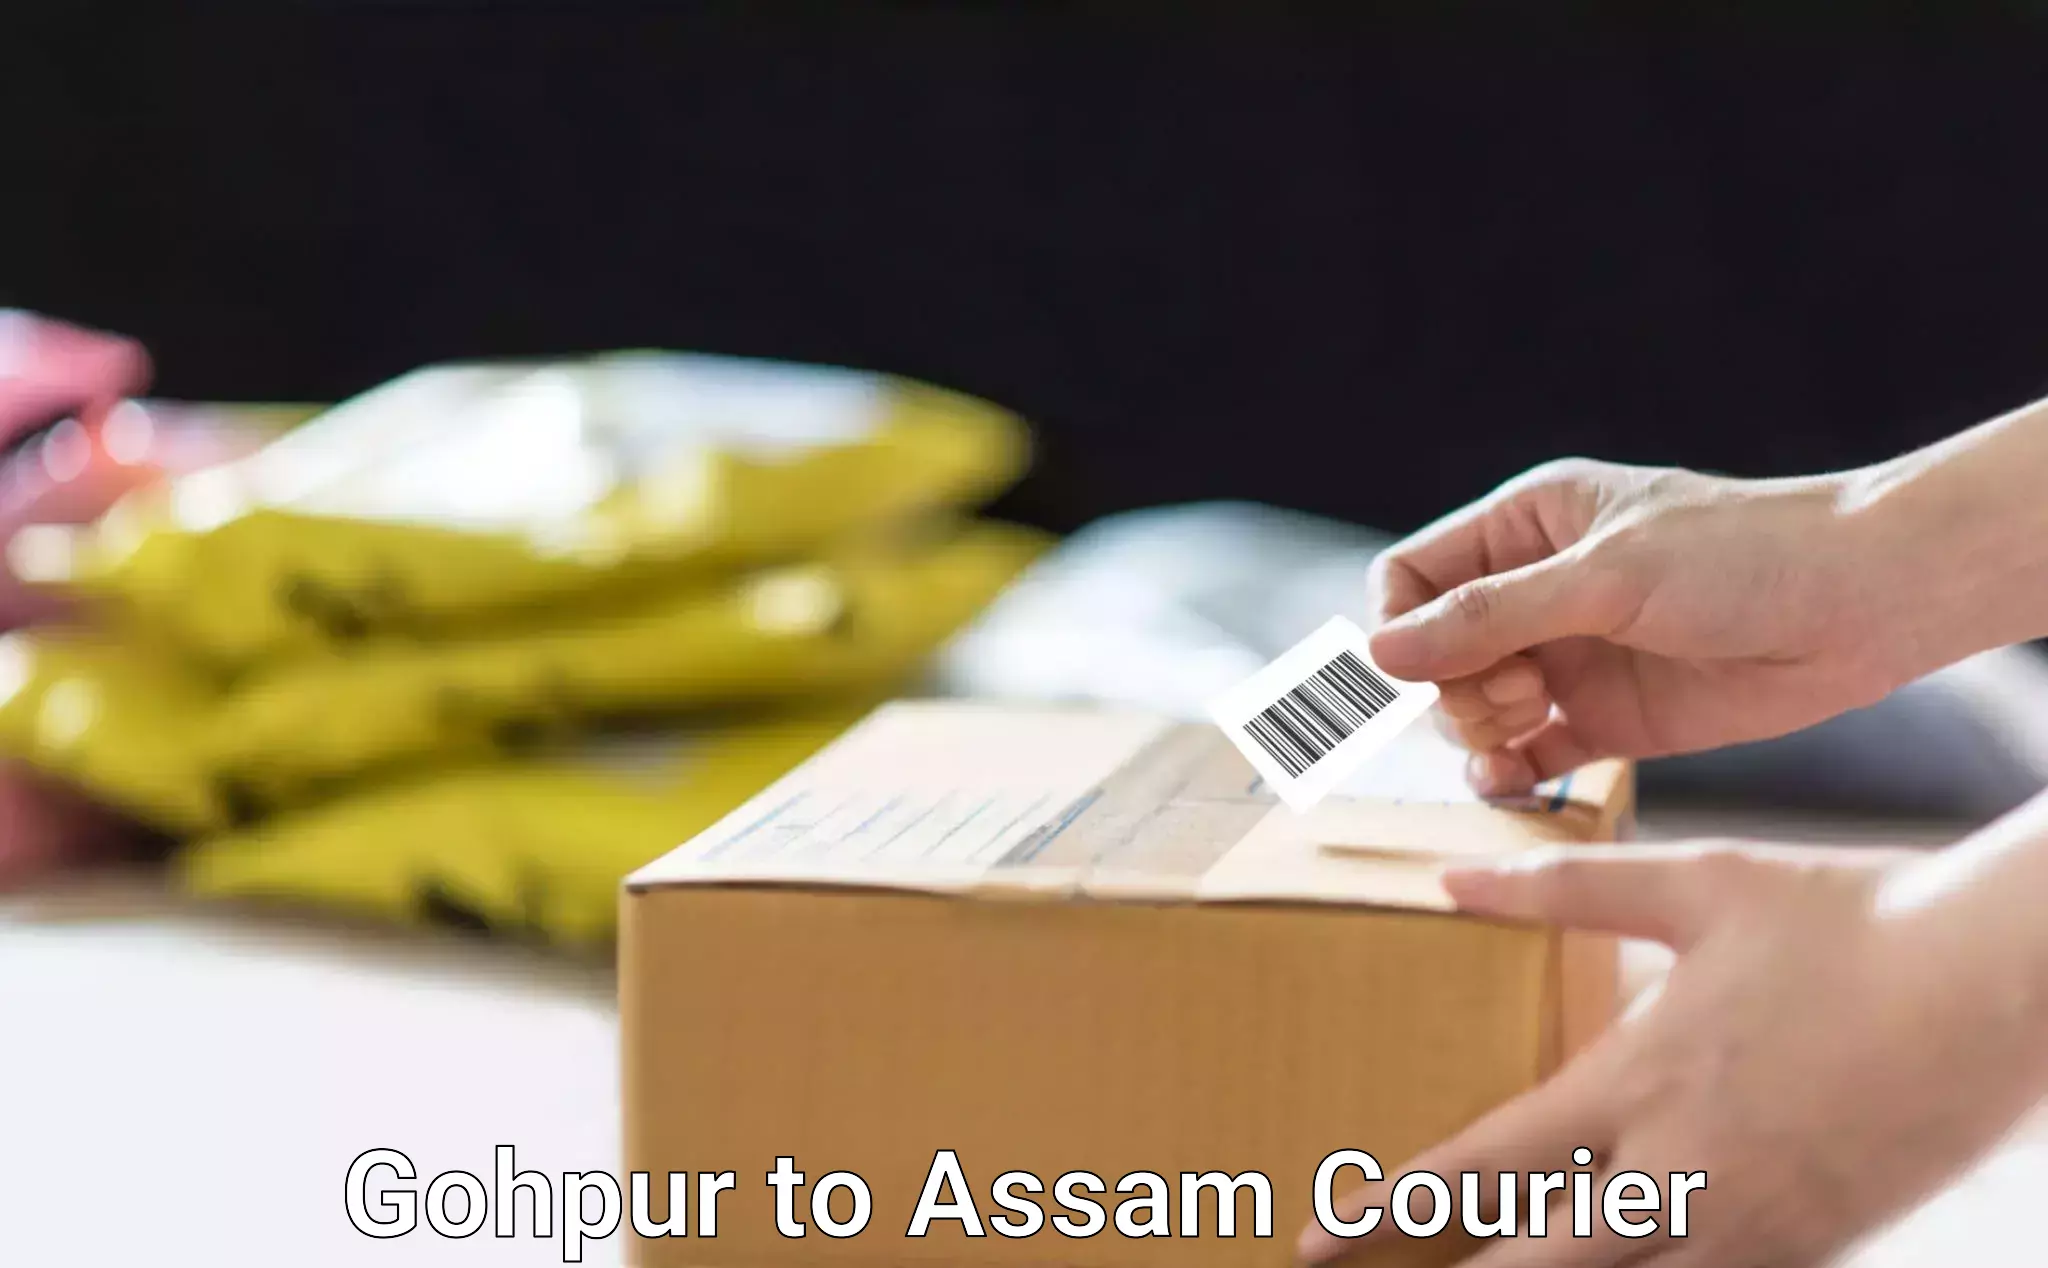 High-quality delivery services in Gohpur to Khetri